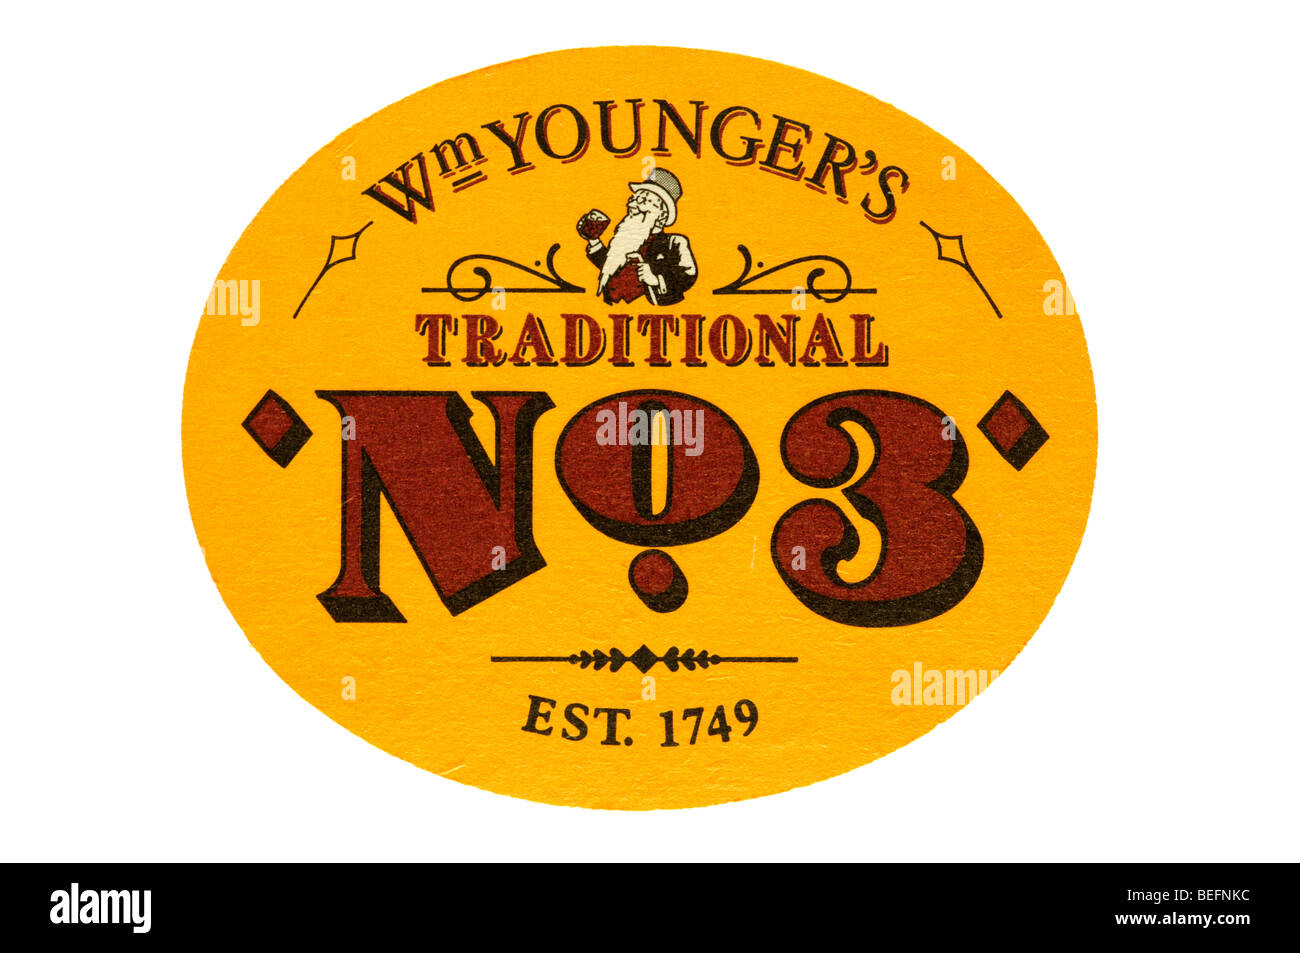 wm younger traditional no 3 est 1749 Stock Photo